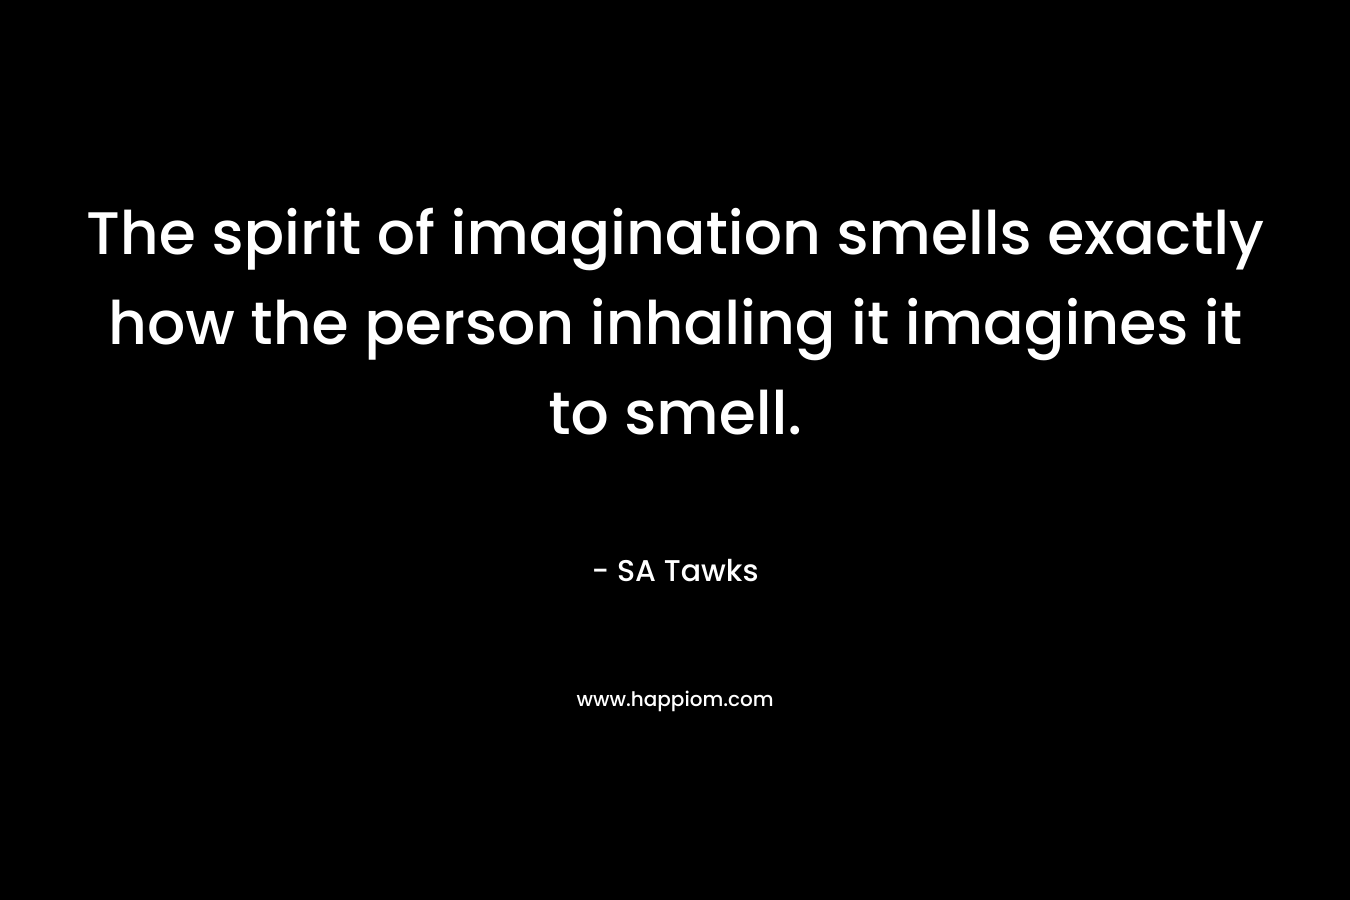 The spirit of imagination smells exactly how the person inhaling it imagines it to smell. – SA Tawks